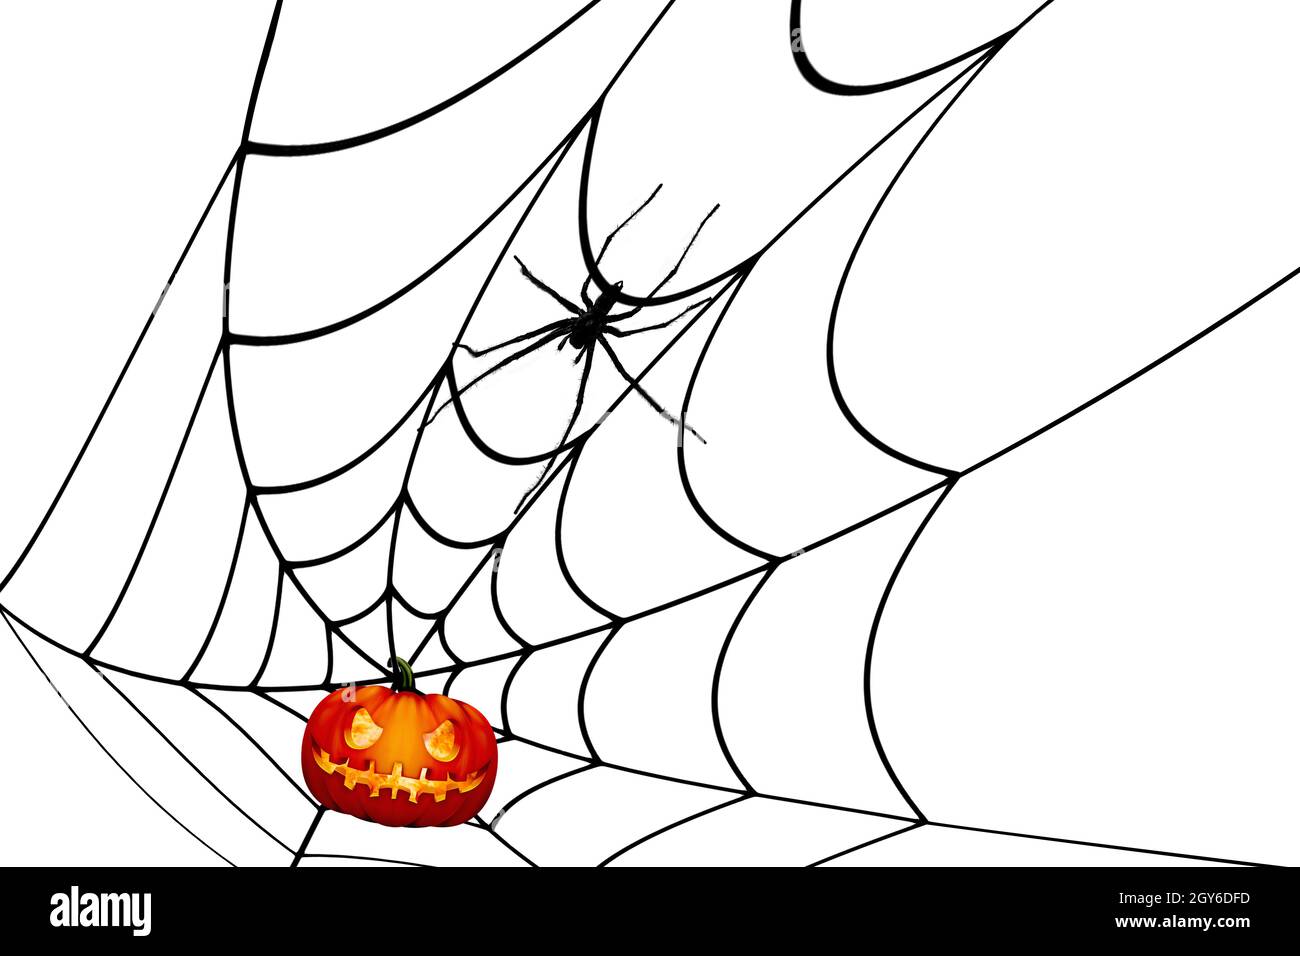 Halloween Concept background with pumpkin stuck on a spider web. Stock Photo